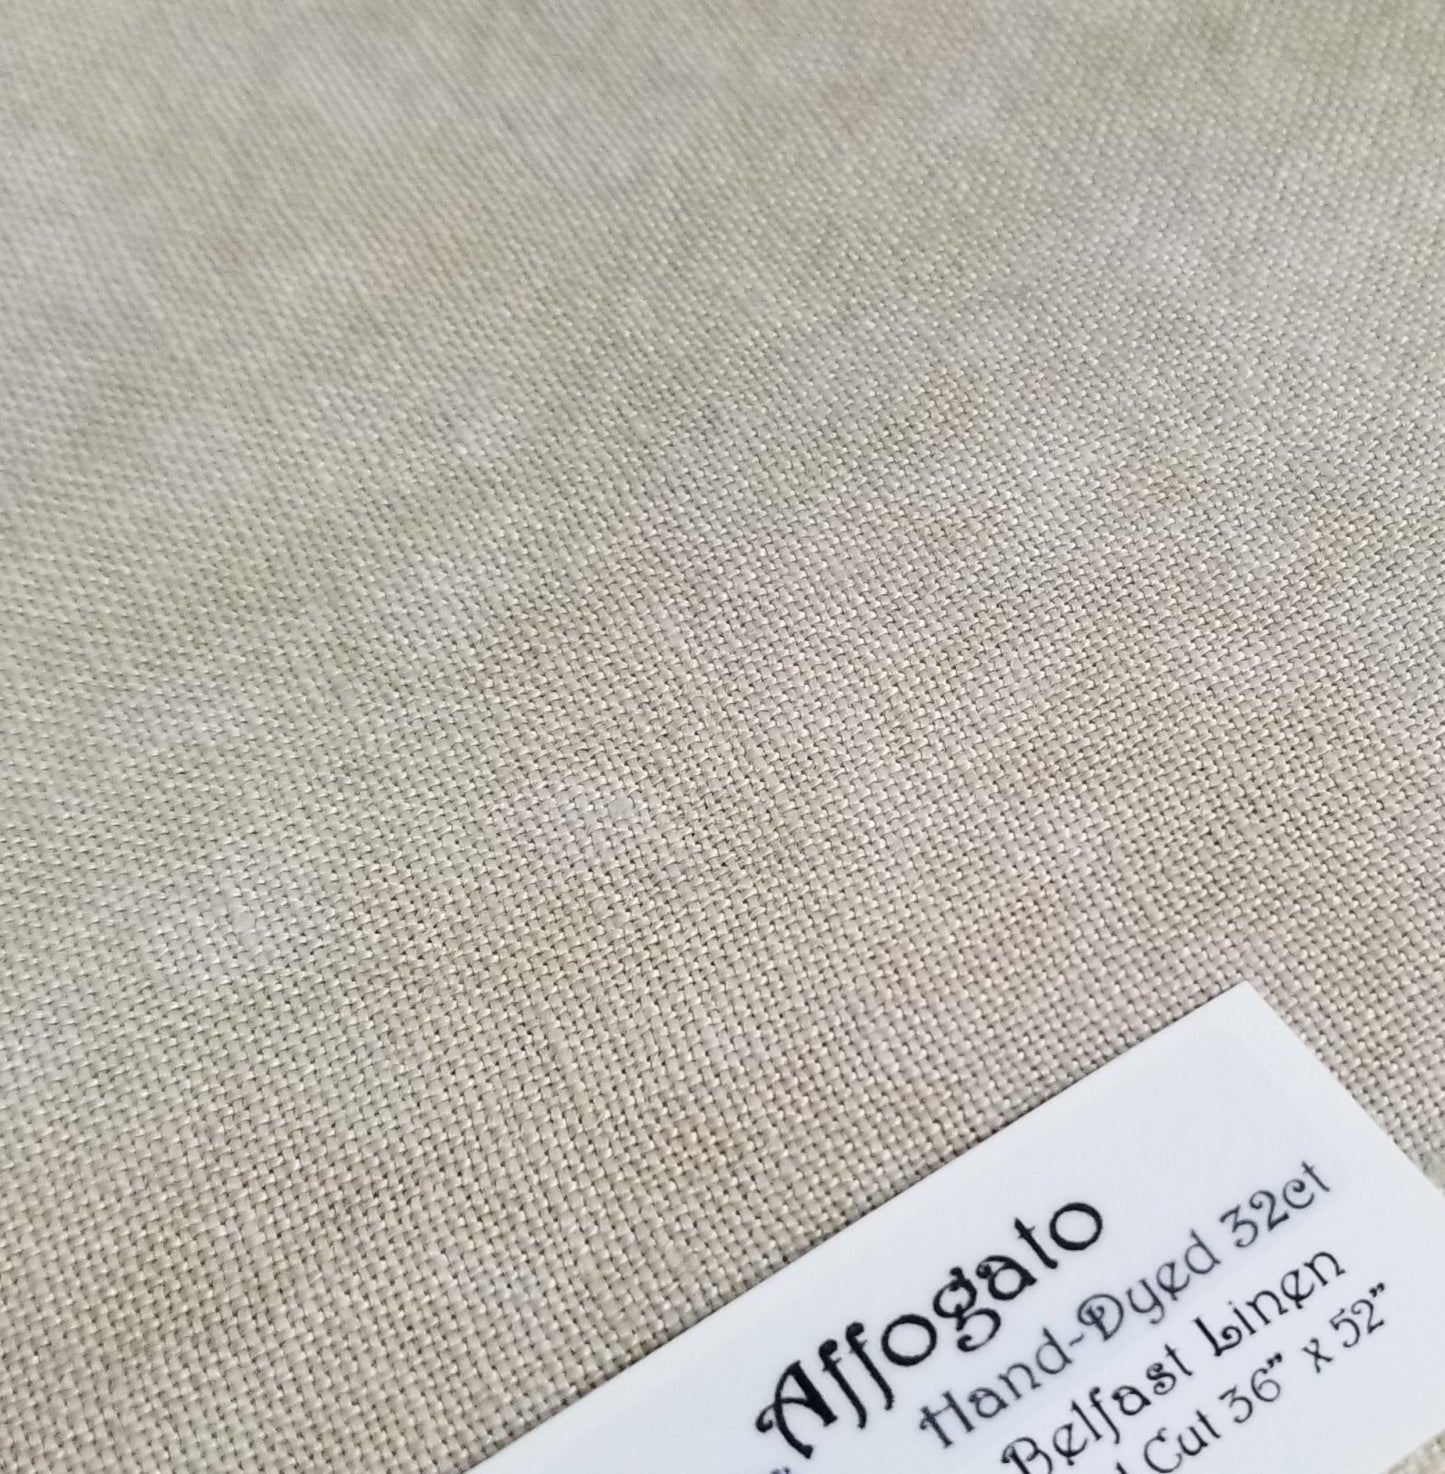 36 Count Linen - Affogato - Fiber on a Whim, Fabric, The Crafty Grimalkin - A Cross Stitch Store